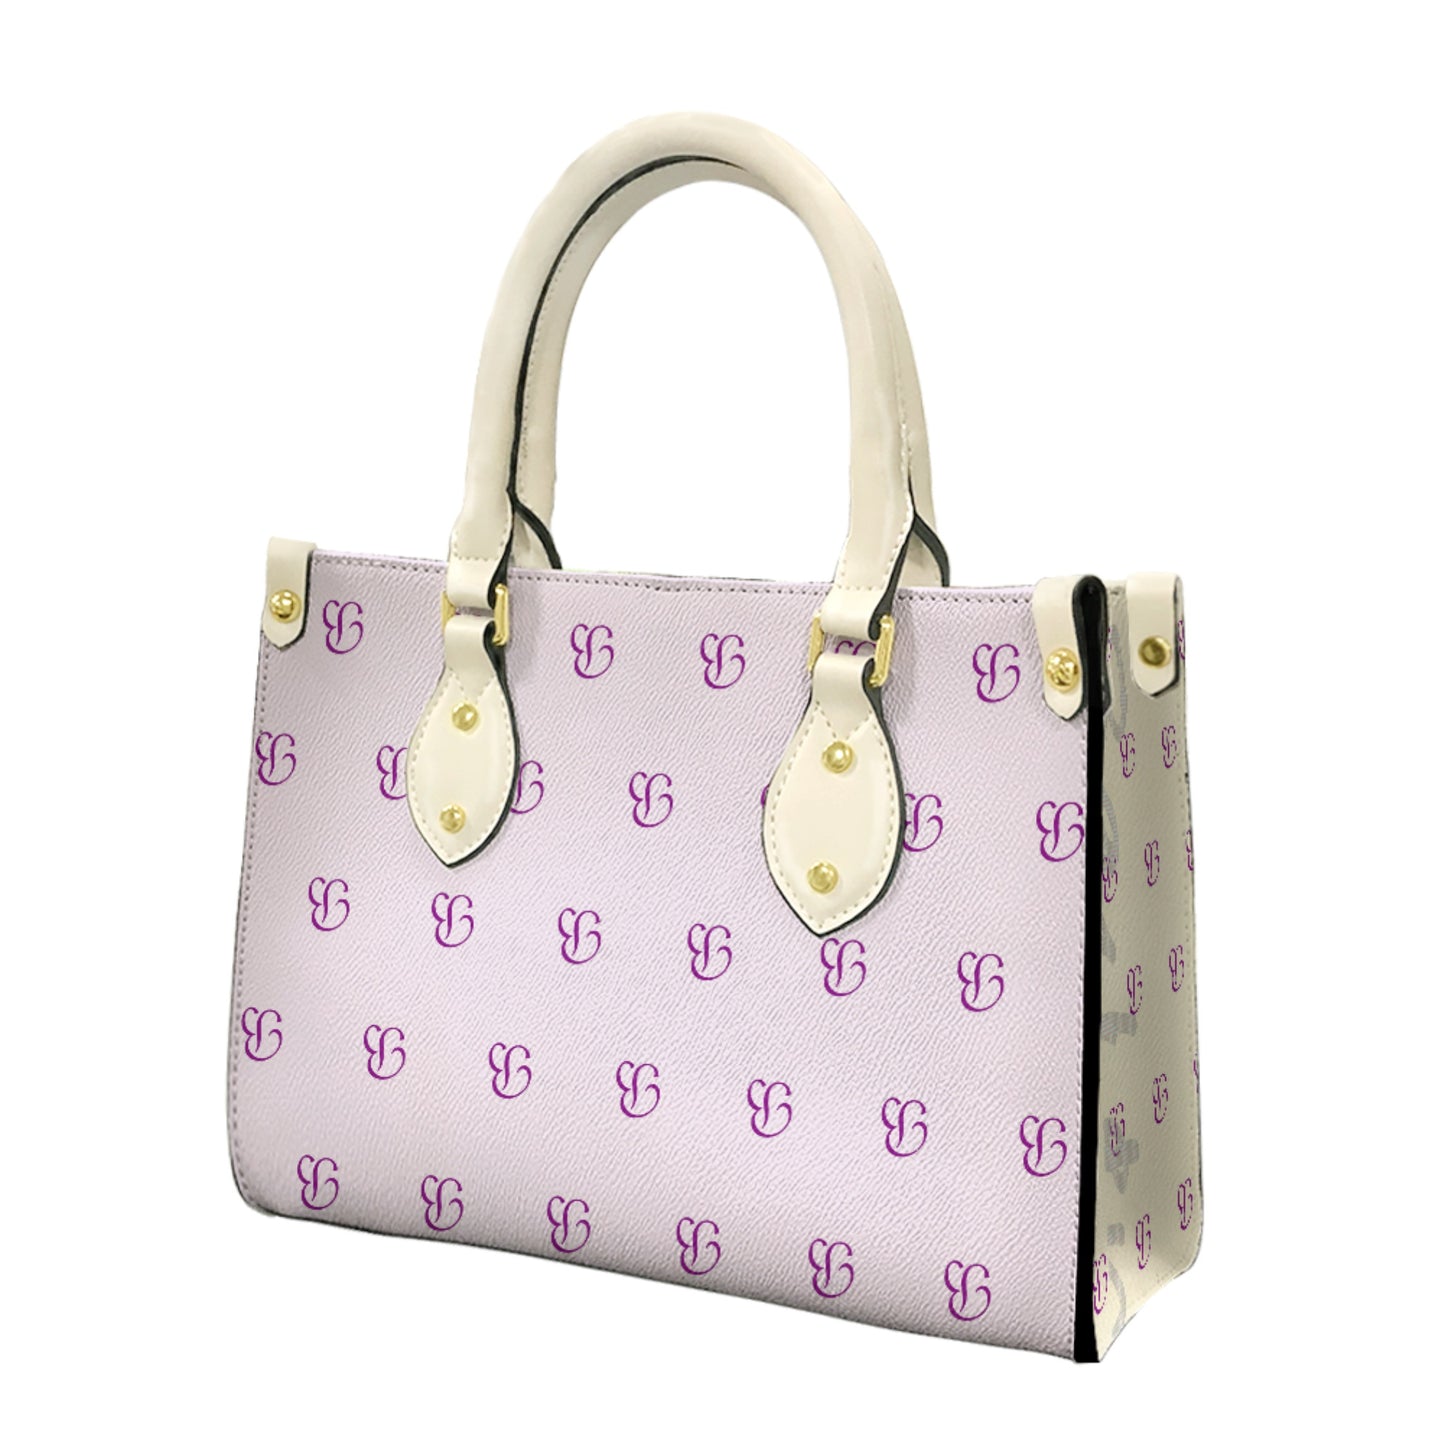 EtherealBe Handbag - Be Unique. Be You.